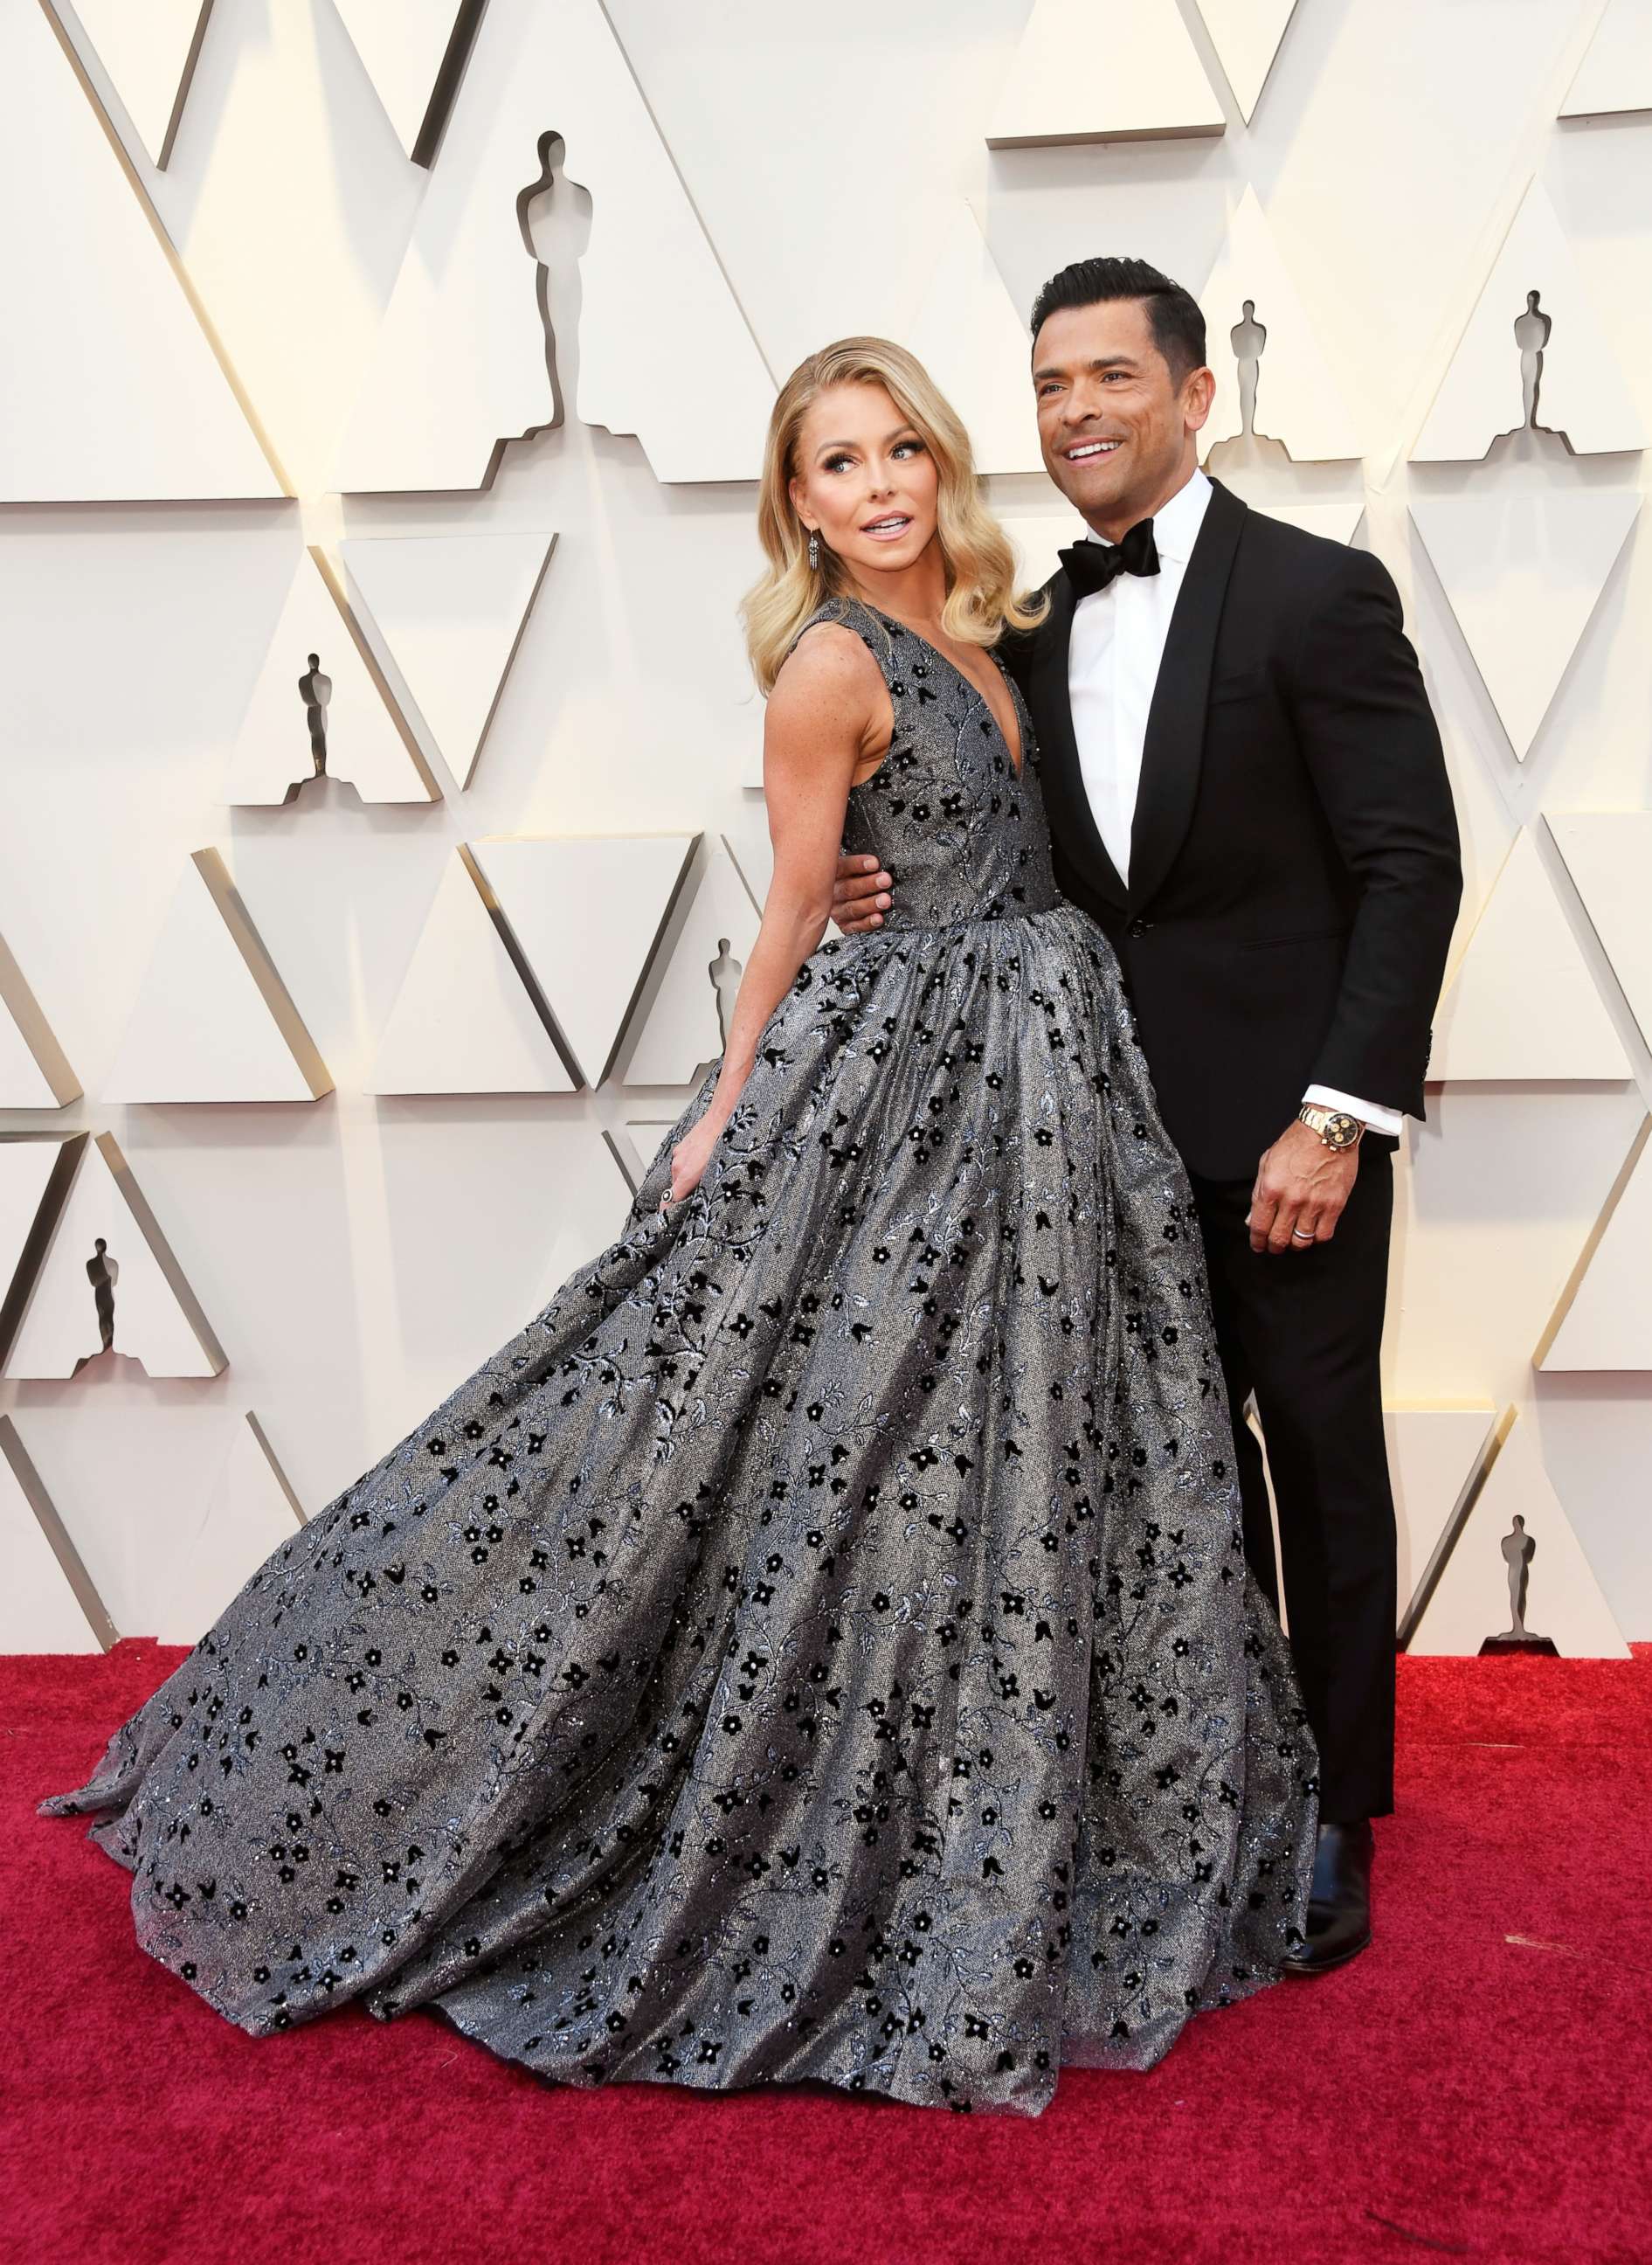 PHOTO: Kelly Ripa and Mark Consuelos attend the 91st Annual Academy Awards on Feb. 24, 2019, in Hollywood, Calif.